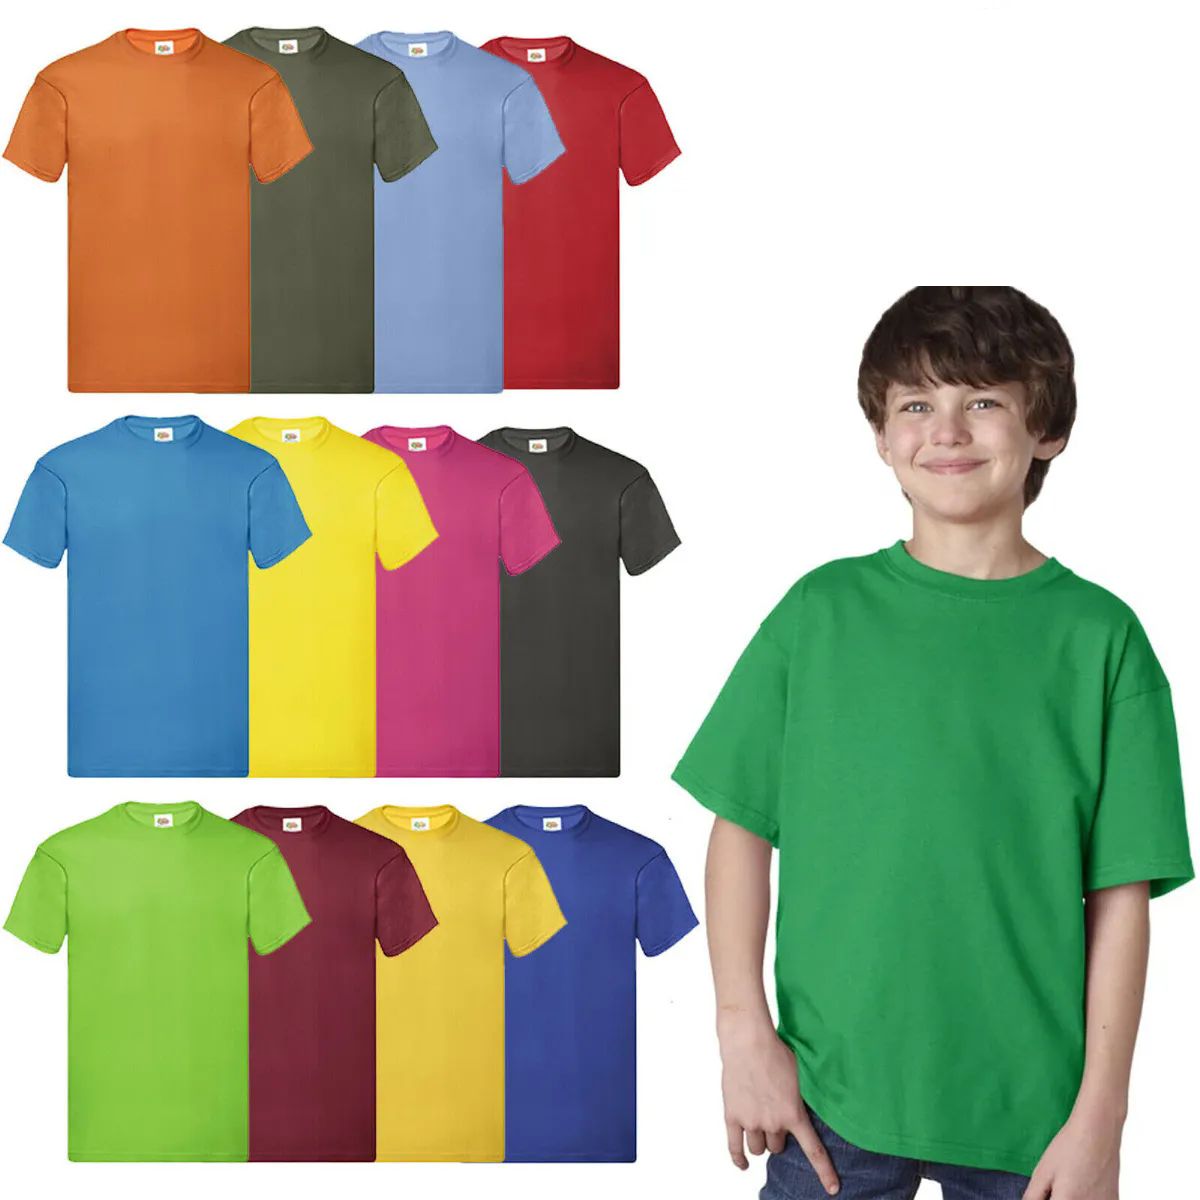 576 Pieces of Billion Hats Kids Youth Cotton Assorted Colors T Shirts Size S